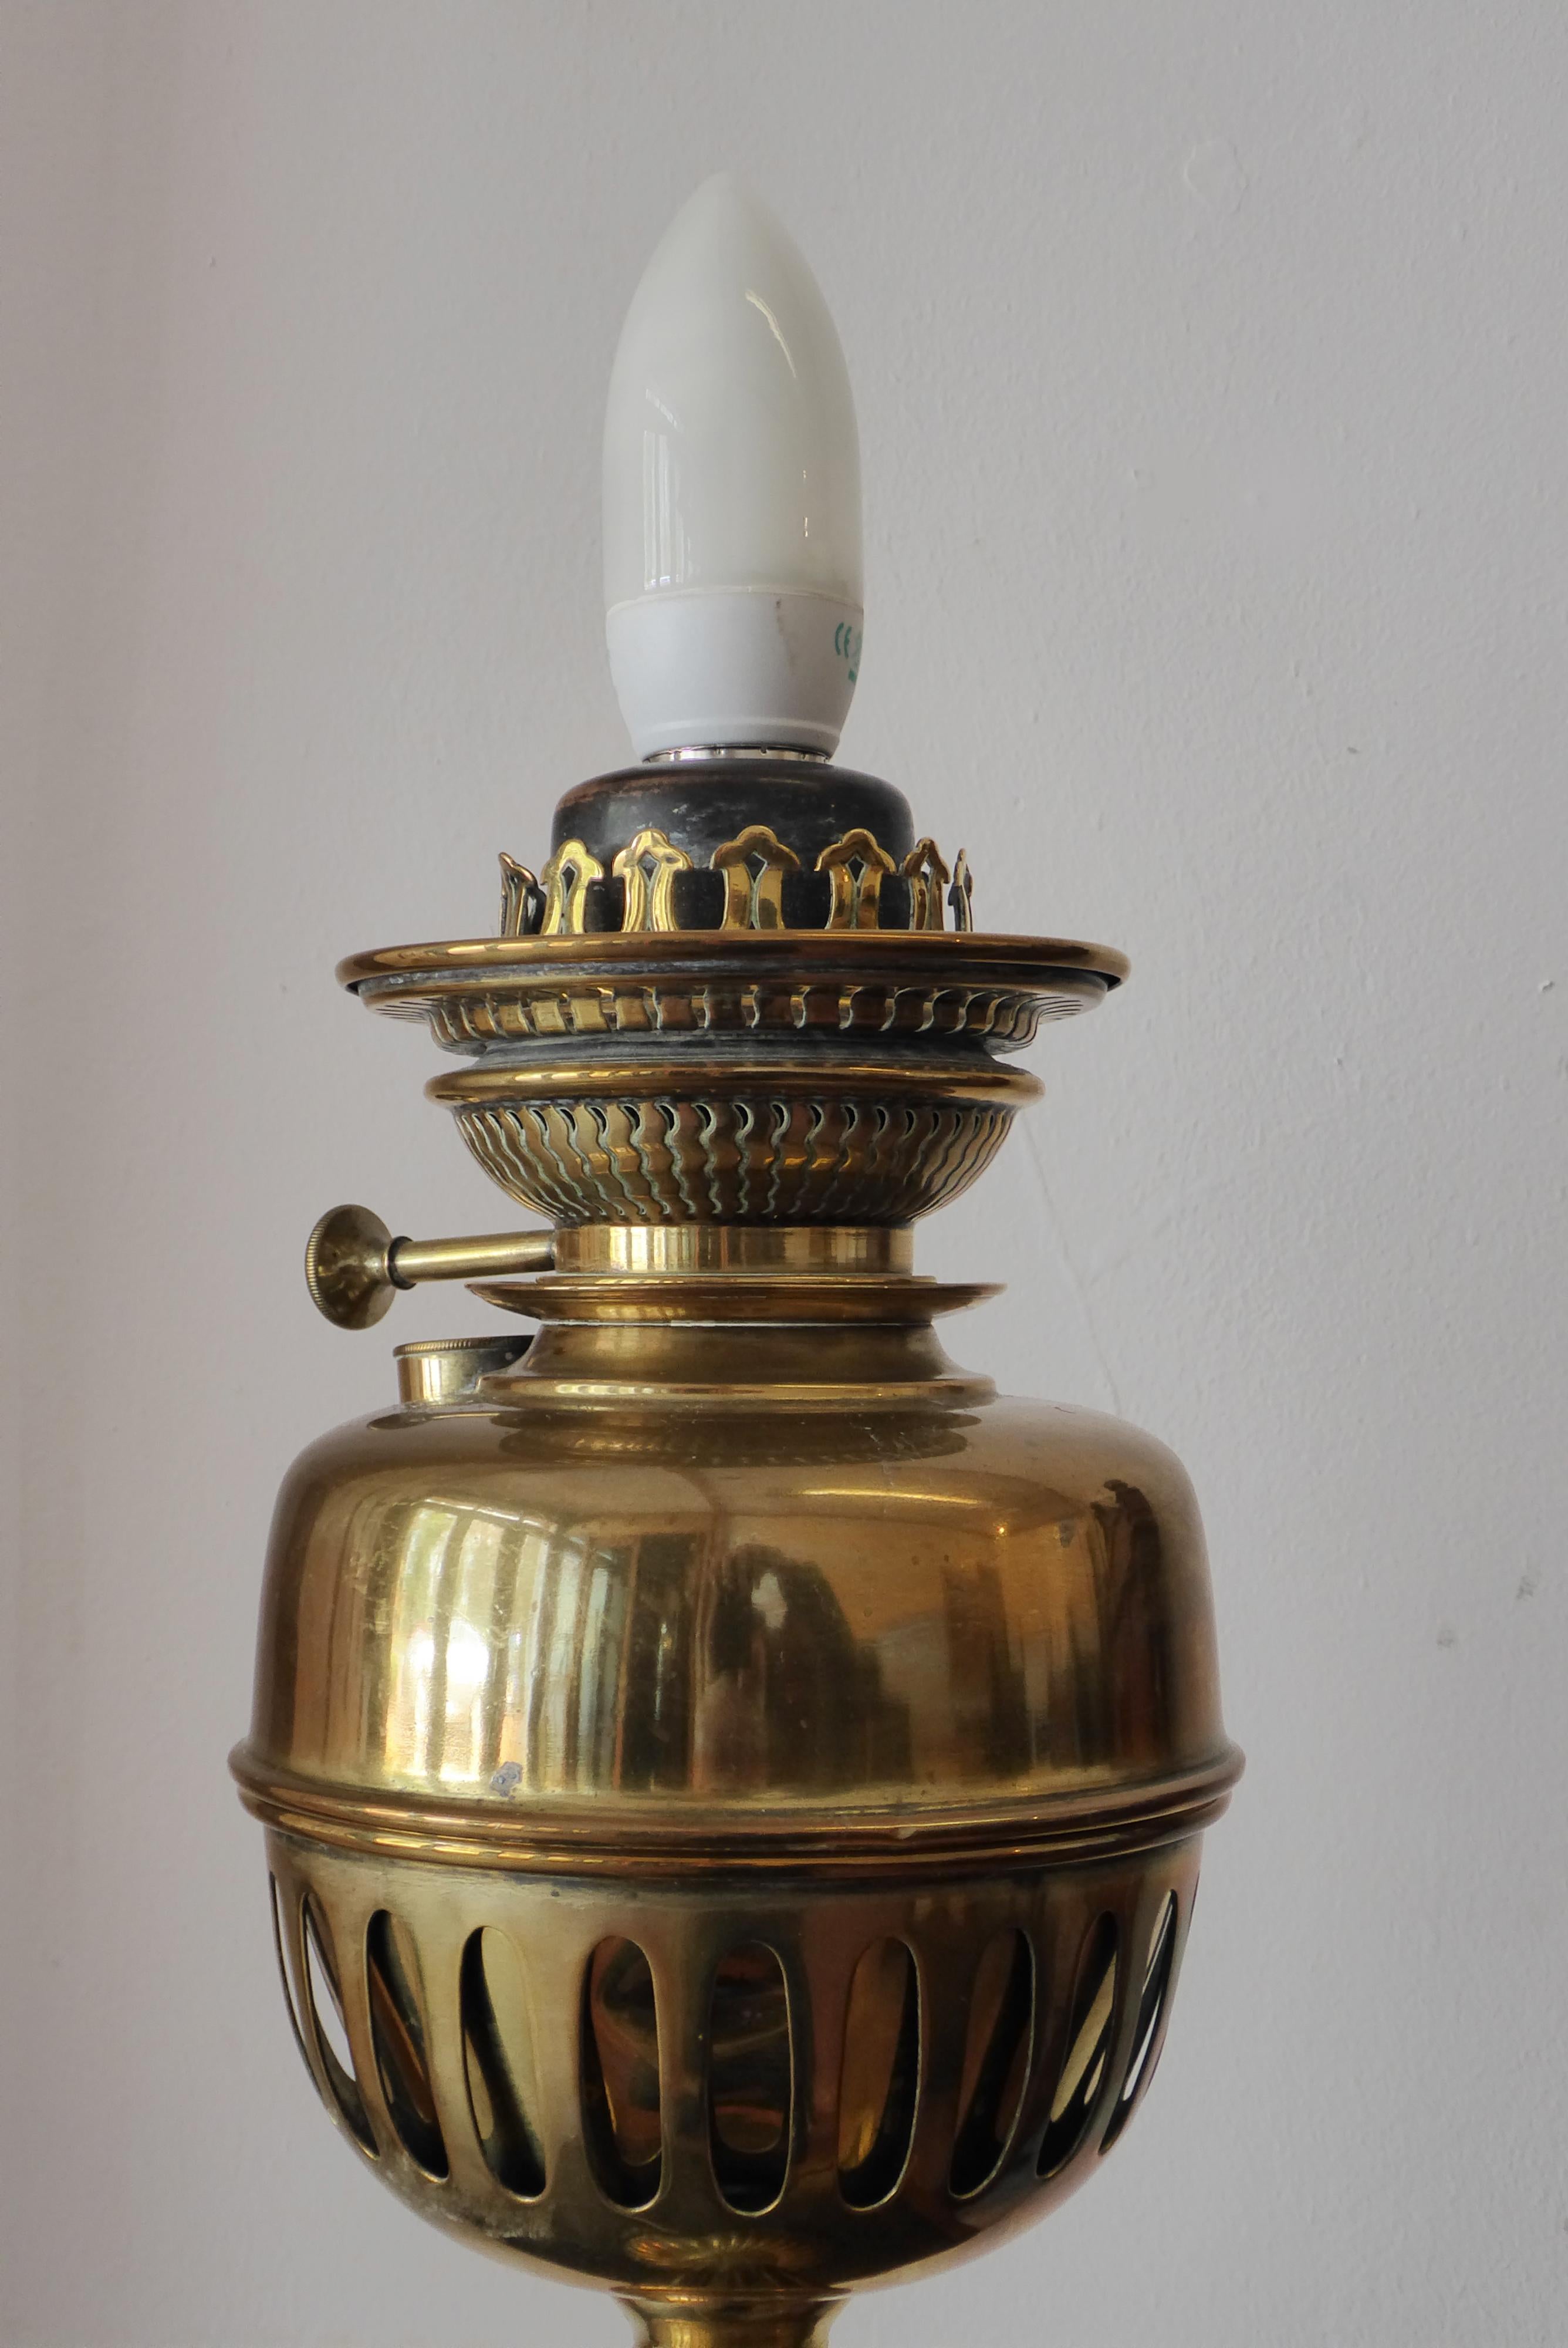 Antique Brass Paraffin Lamp Converted to Electric In Good Condition For Sale In Glencarse, Perthshire